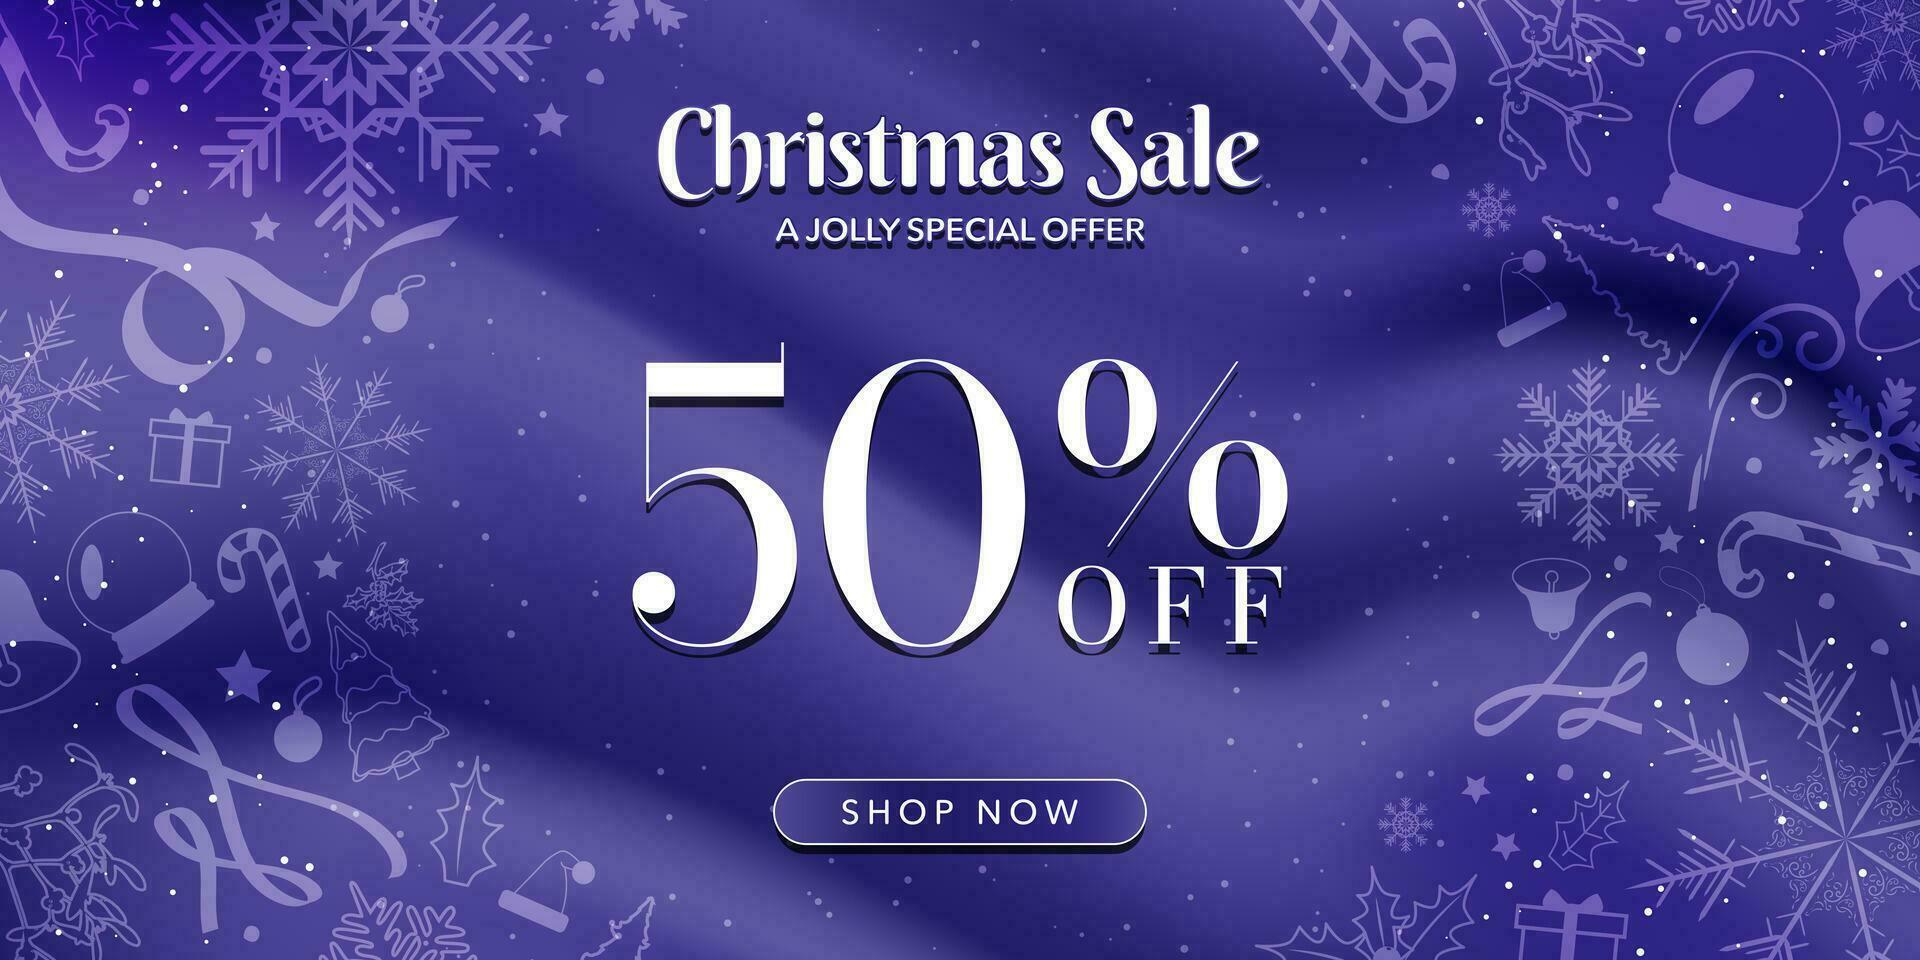 Purple Blue and White Christmas Gradient Banner with 50 off Christmas Sale Sign with Shop Now CTA Button. White Christmas-themed icons and designs. Editable Vector Illustration. EPS 10.